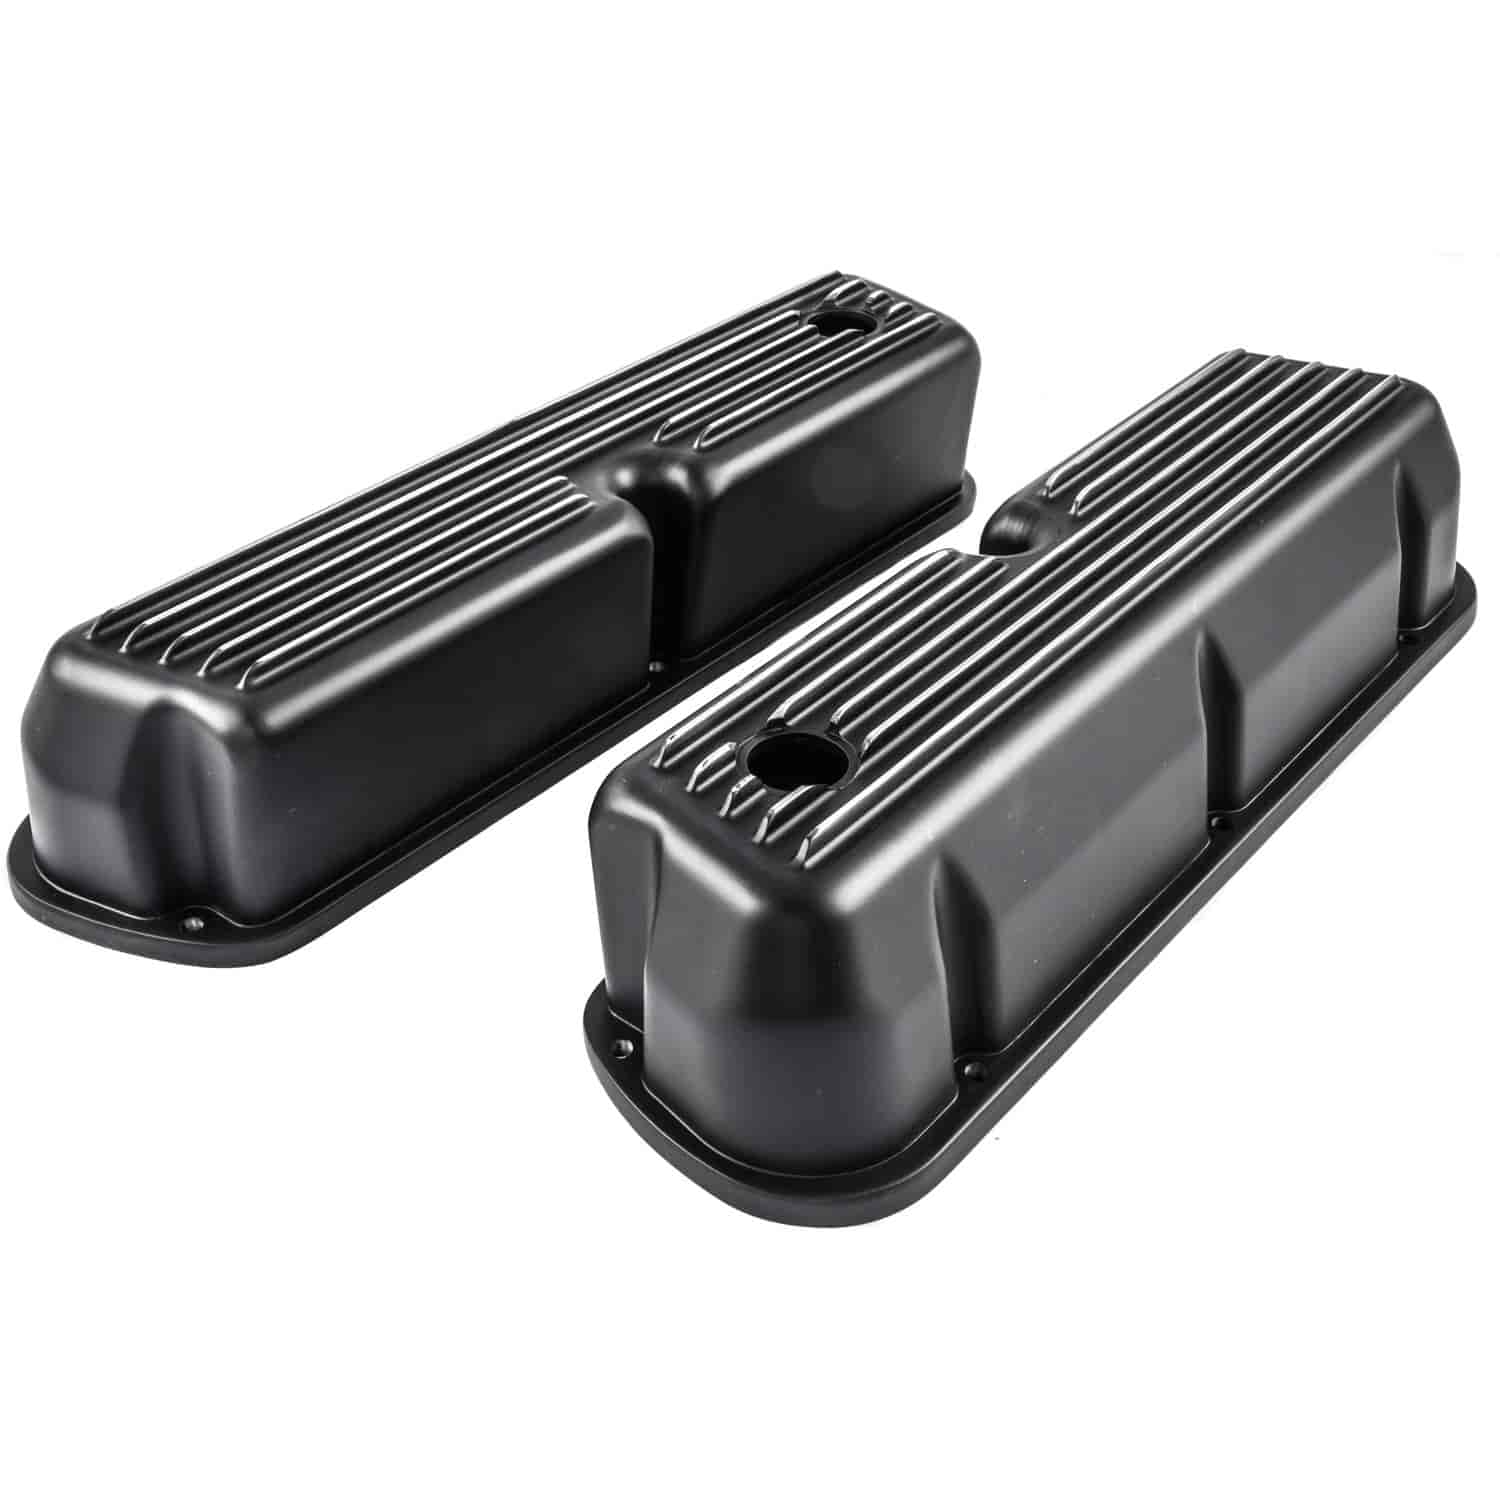 Black Finned Valve Covers for Small Block Ford